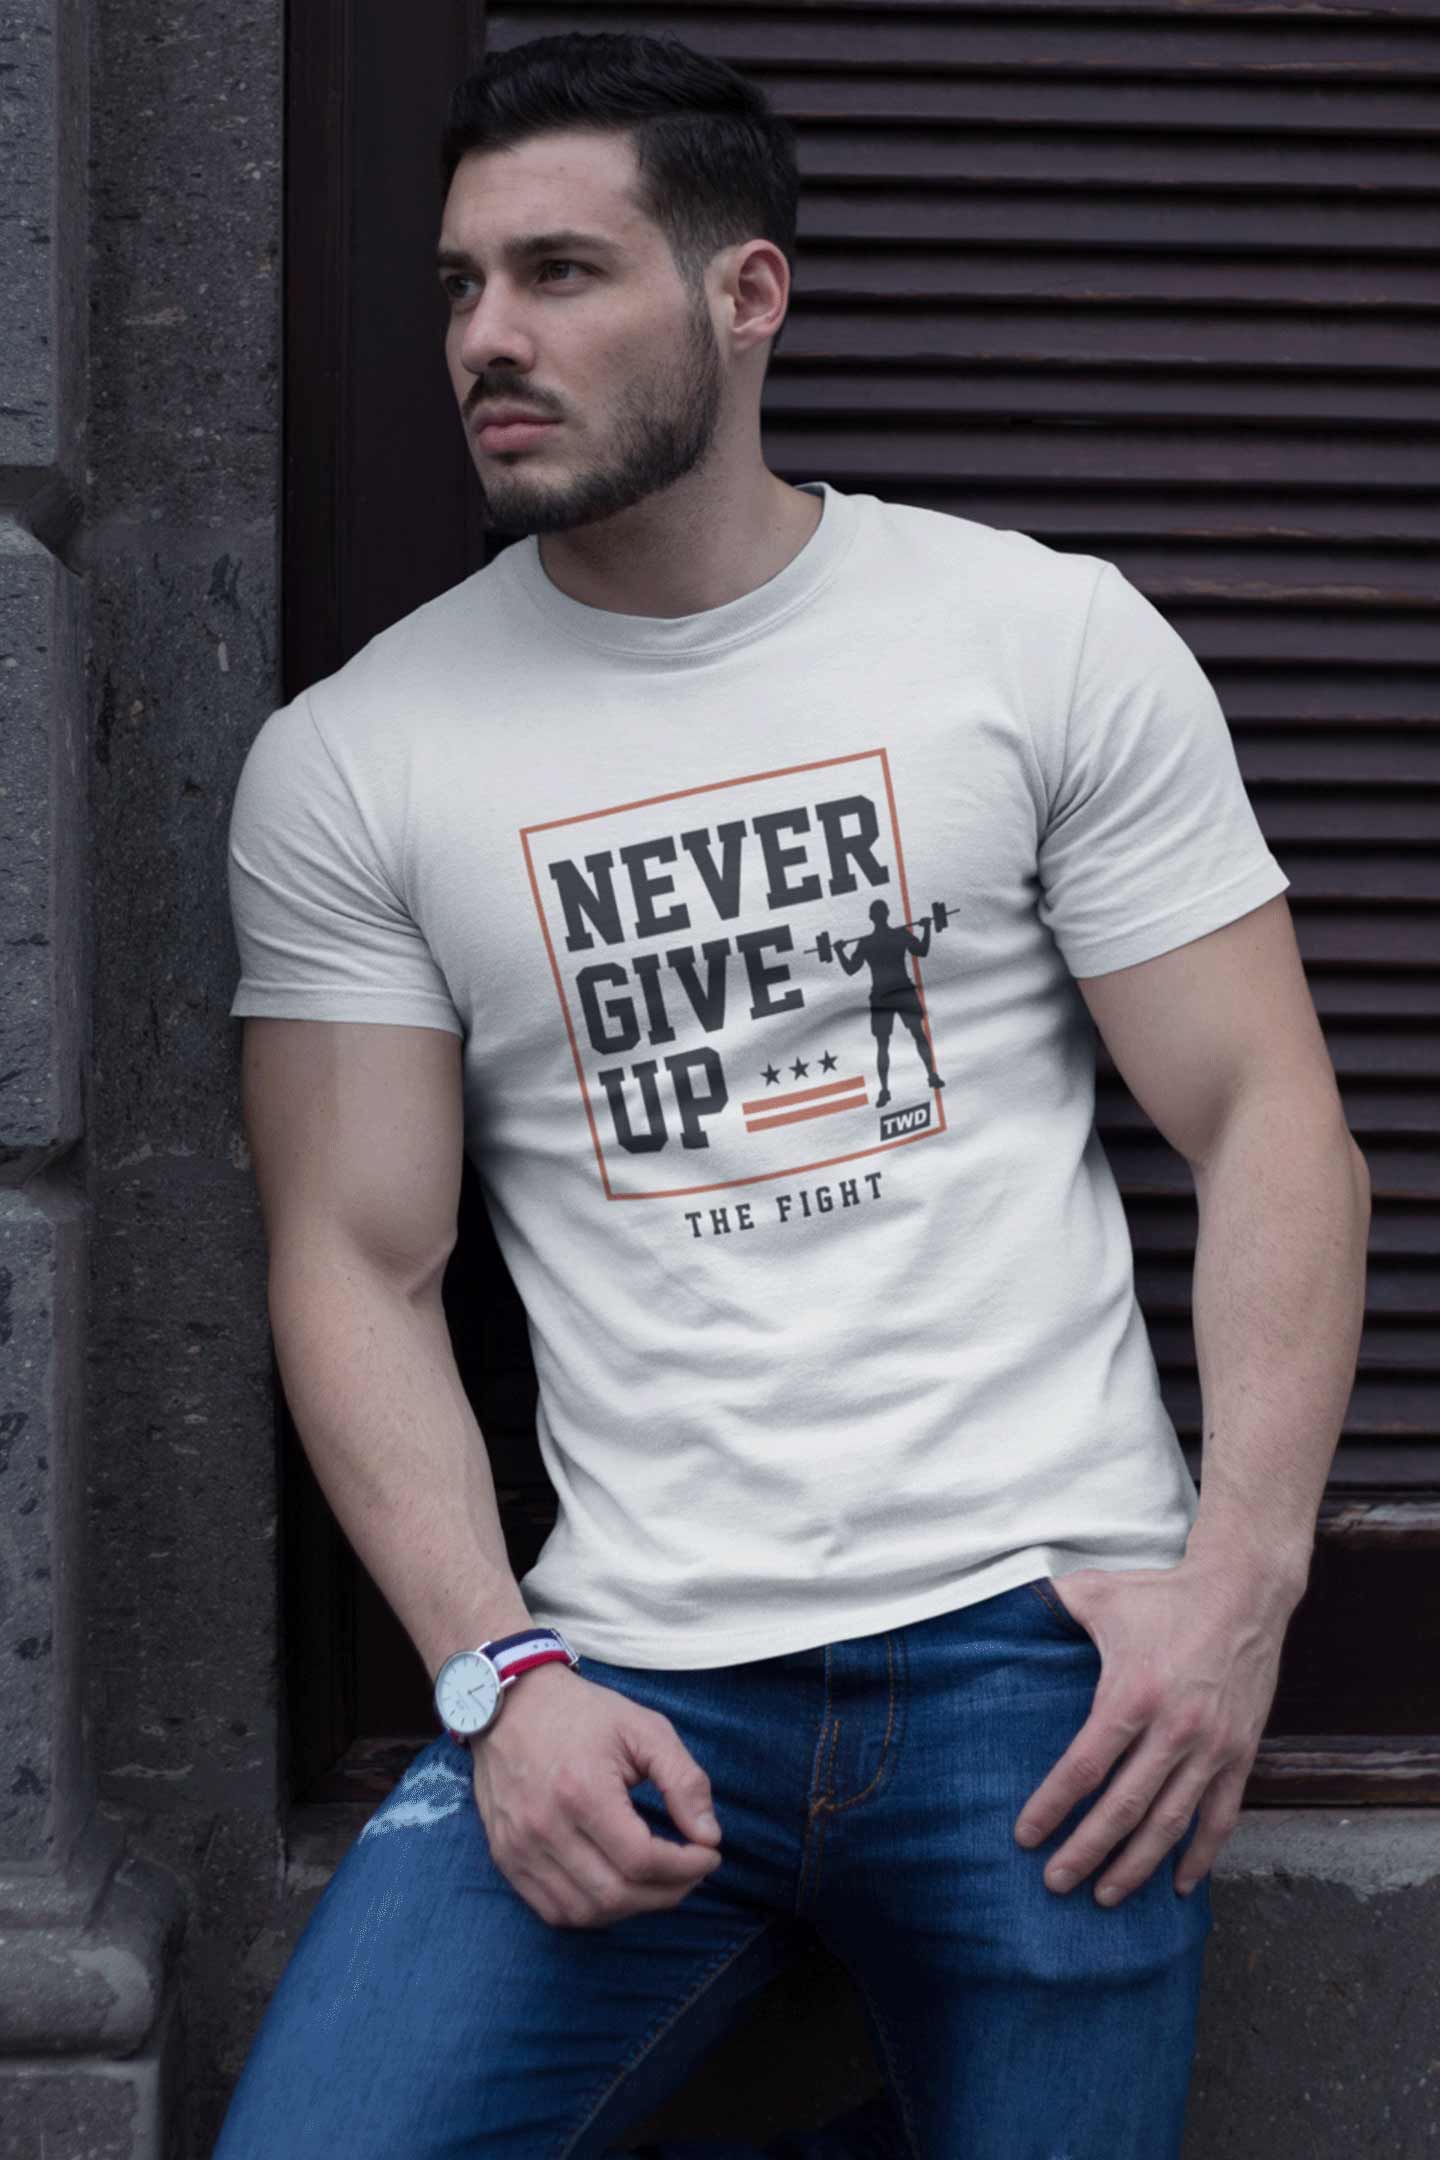 The Fight T-Shirts For Men, White, Stylish Tshirts